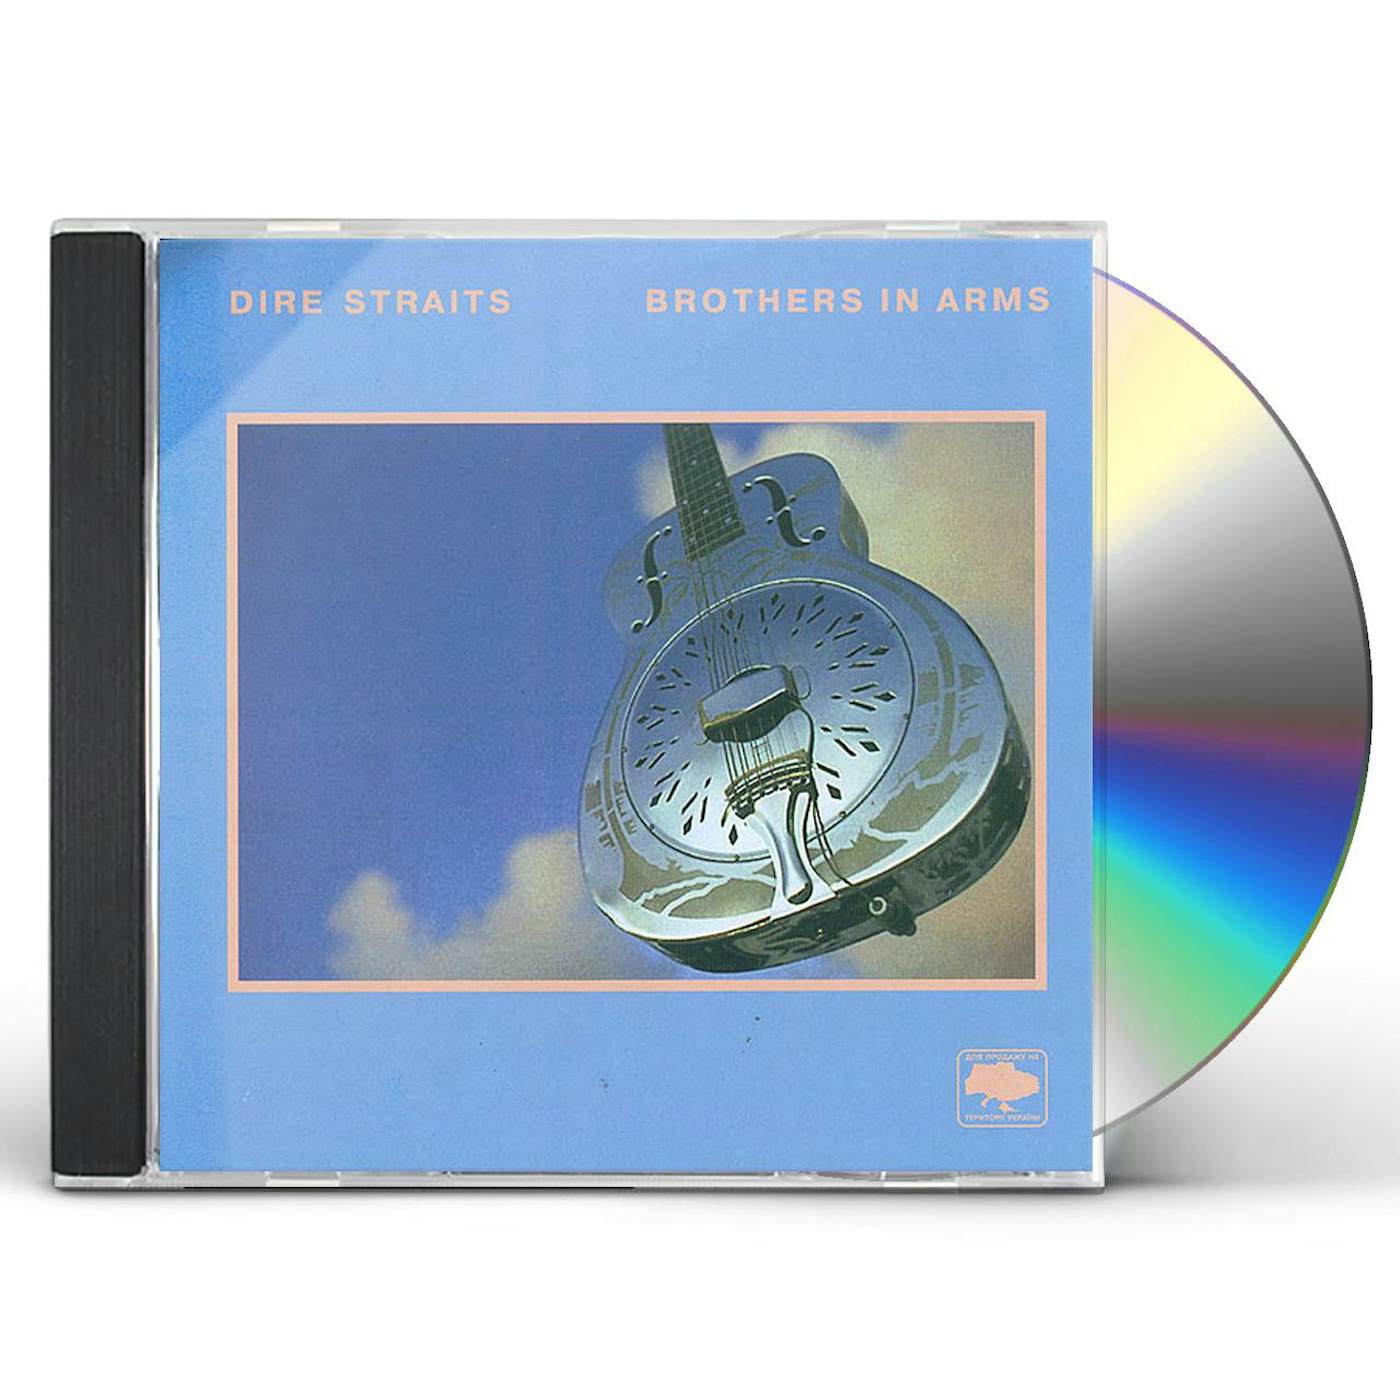 Dire Straits BROTHERS IN ARMS CD